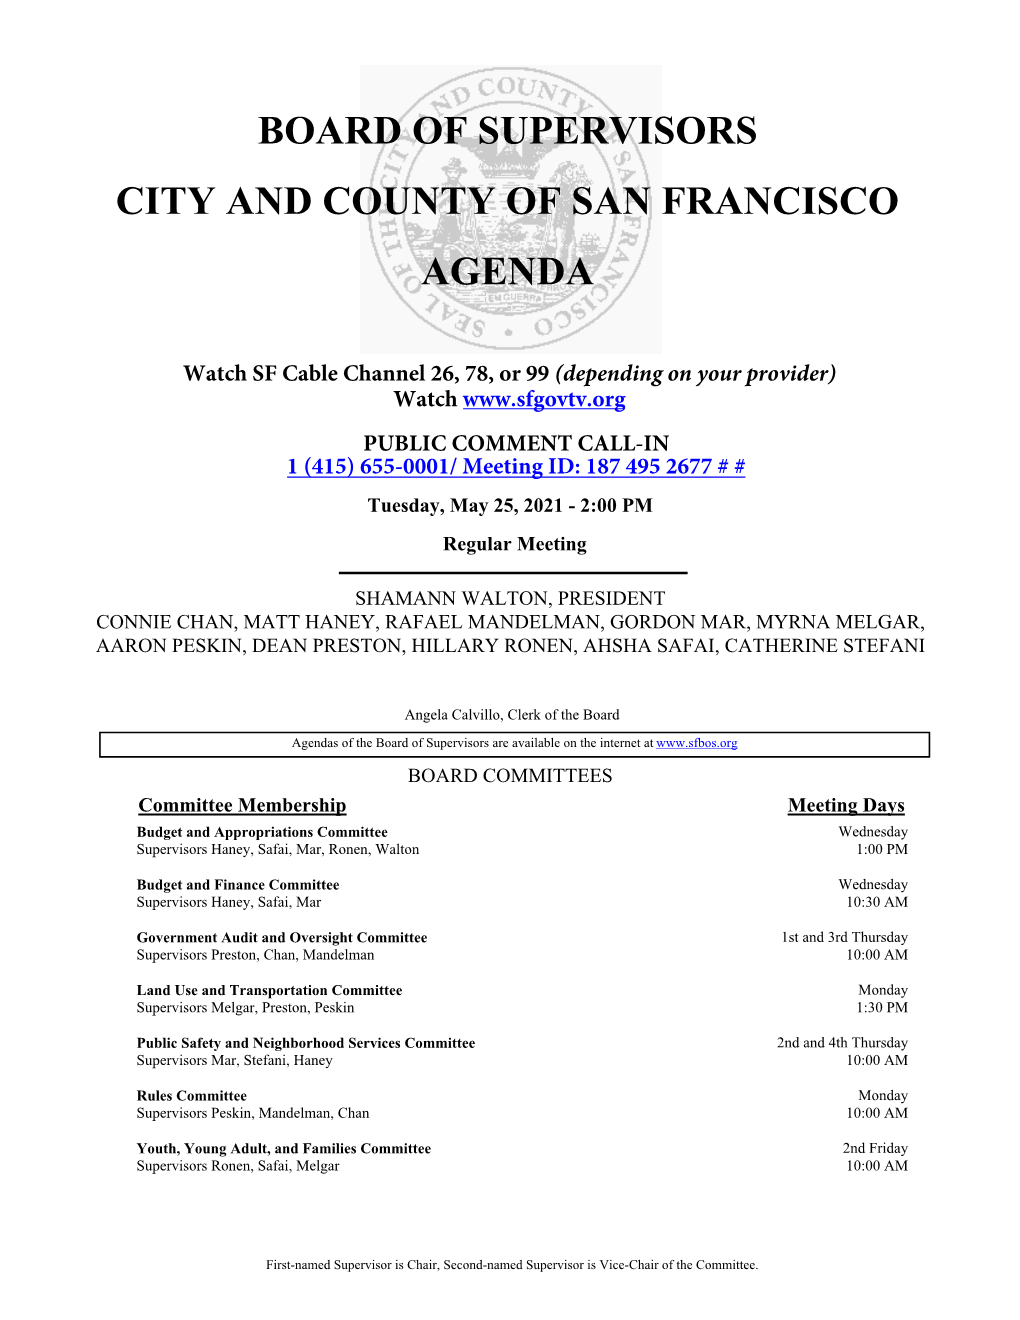 Board of Supervisors City and County of San Francisco Agenda